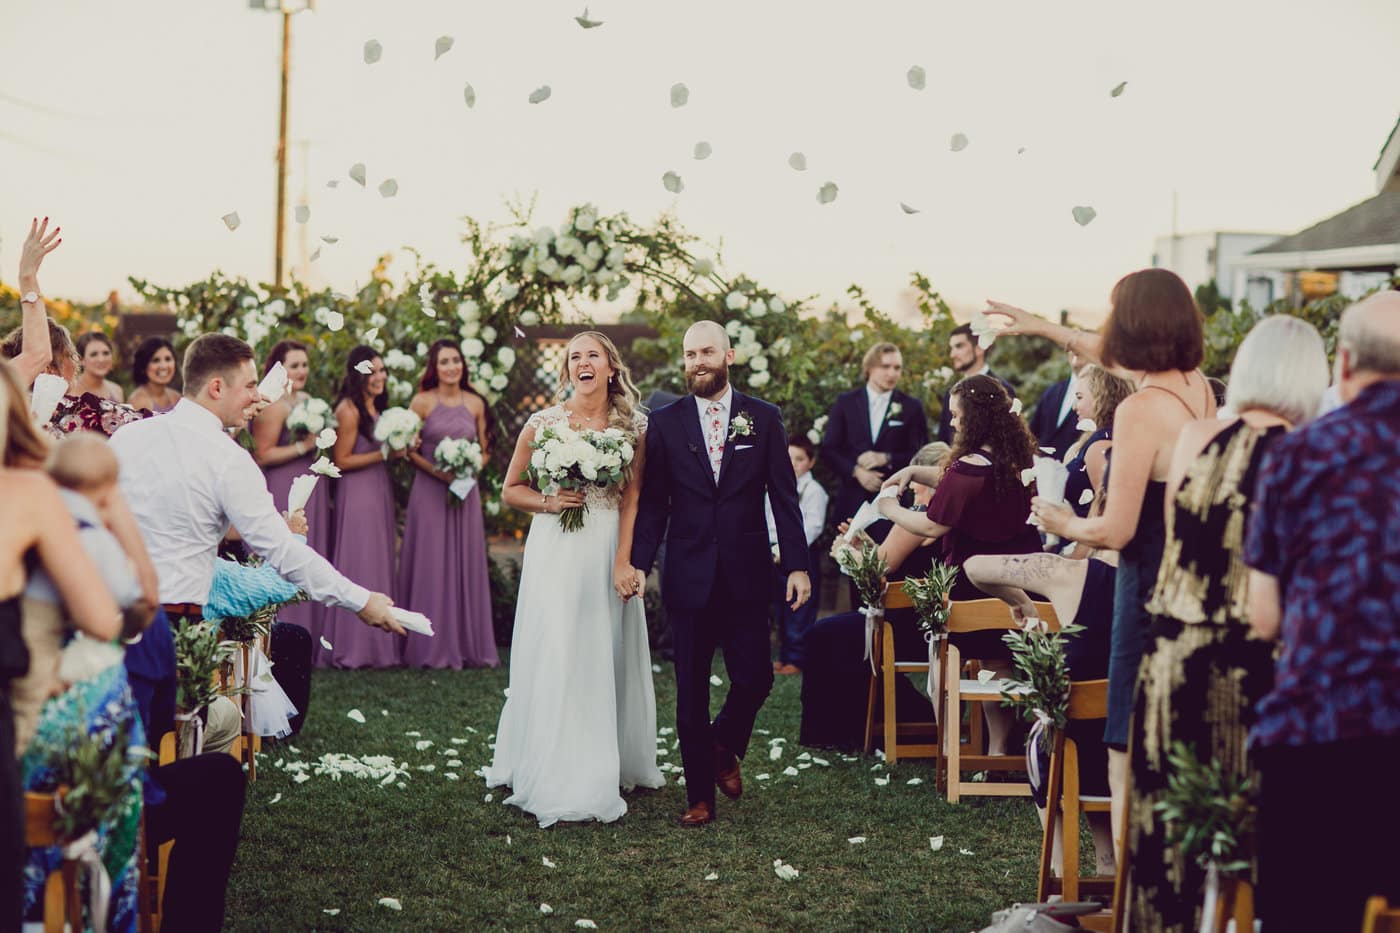 Smiling bride and groom walk down the wedding aisle at Scribner Bend Vineyards as guests toss rose petals in the air.